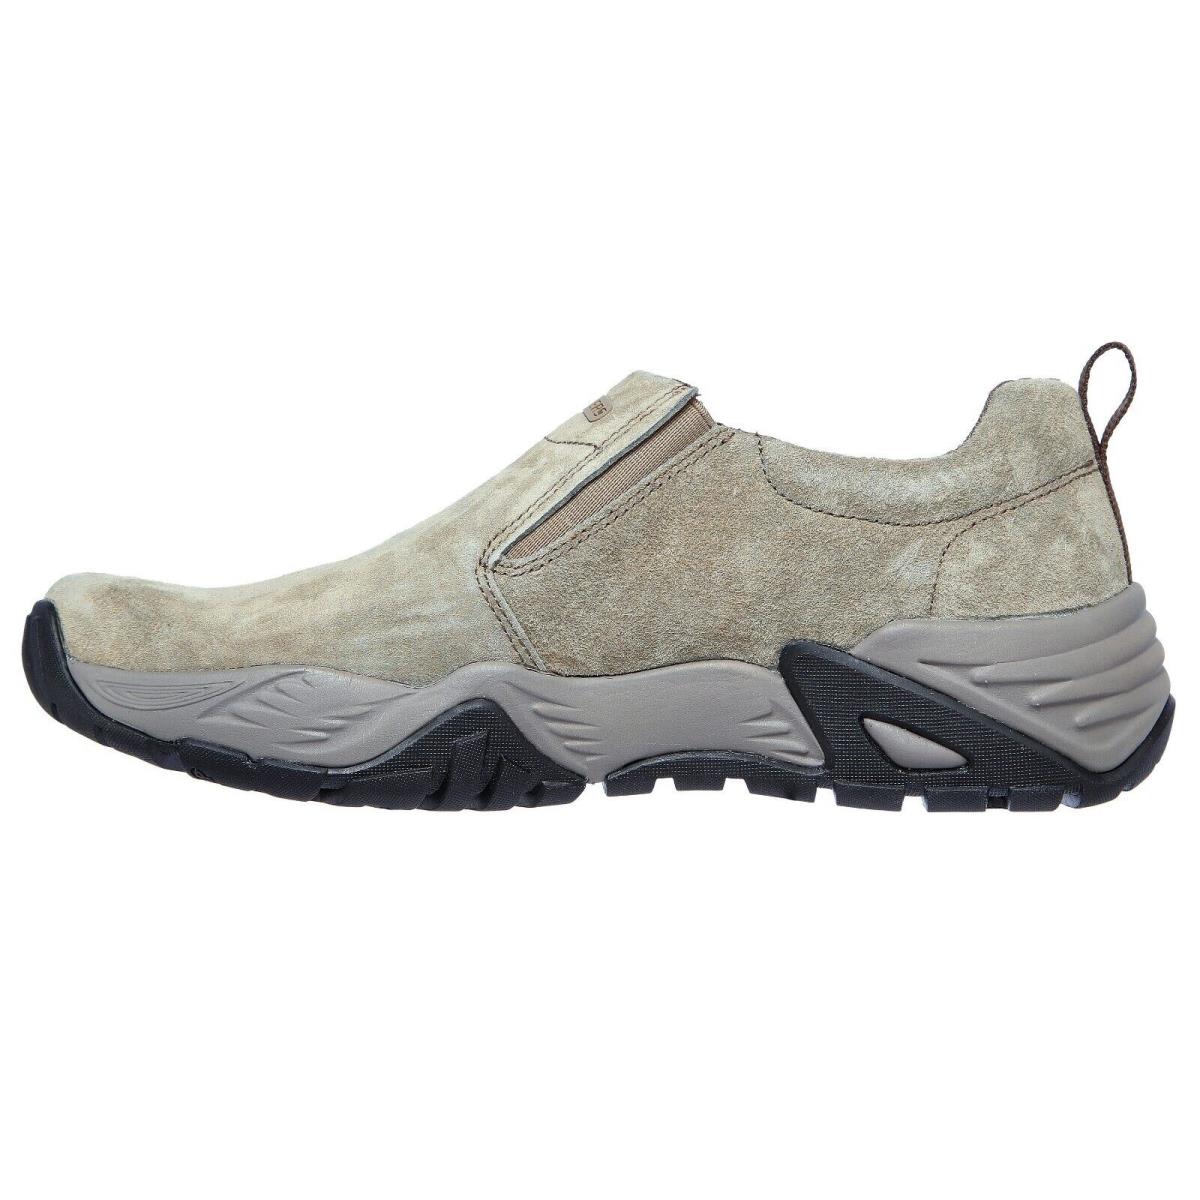 Skechers shoes Recon Sandro - Taupe 2